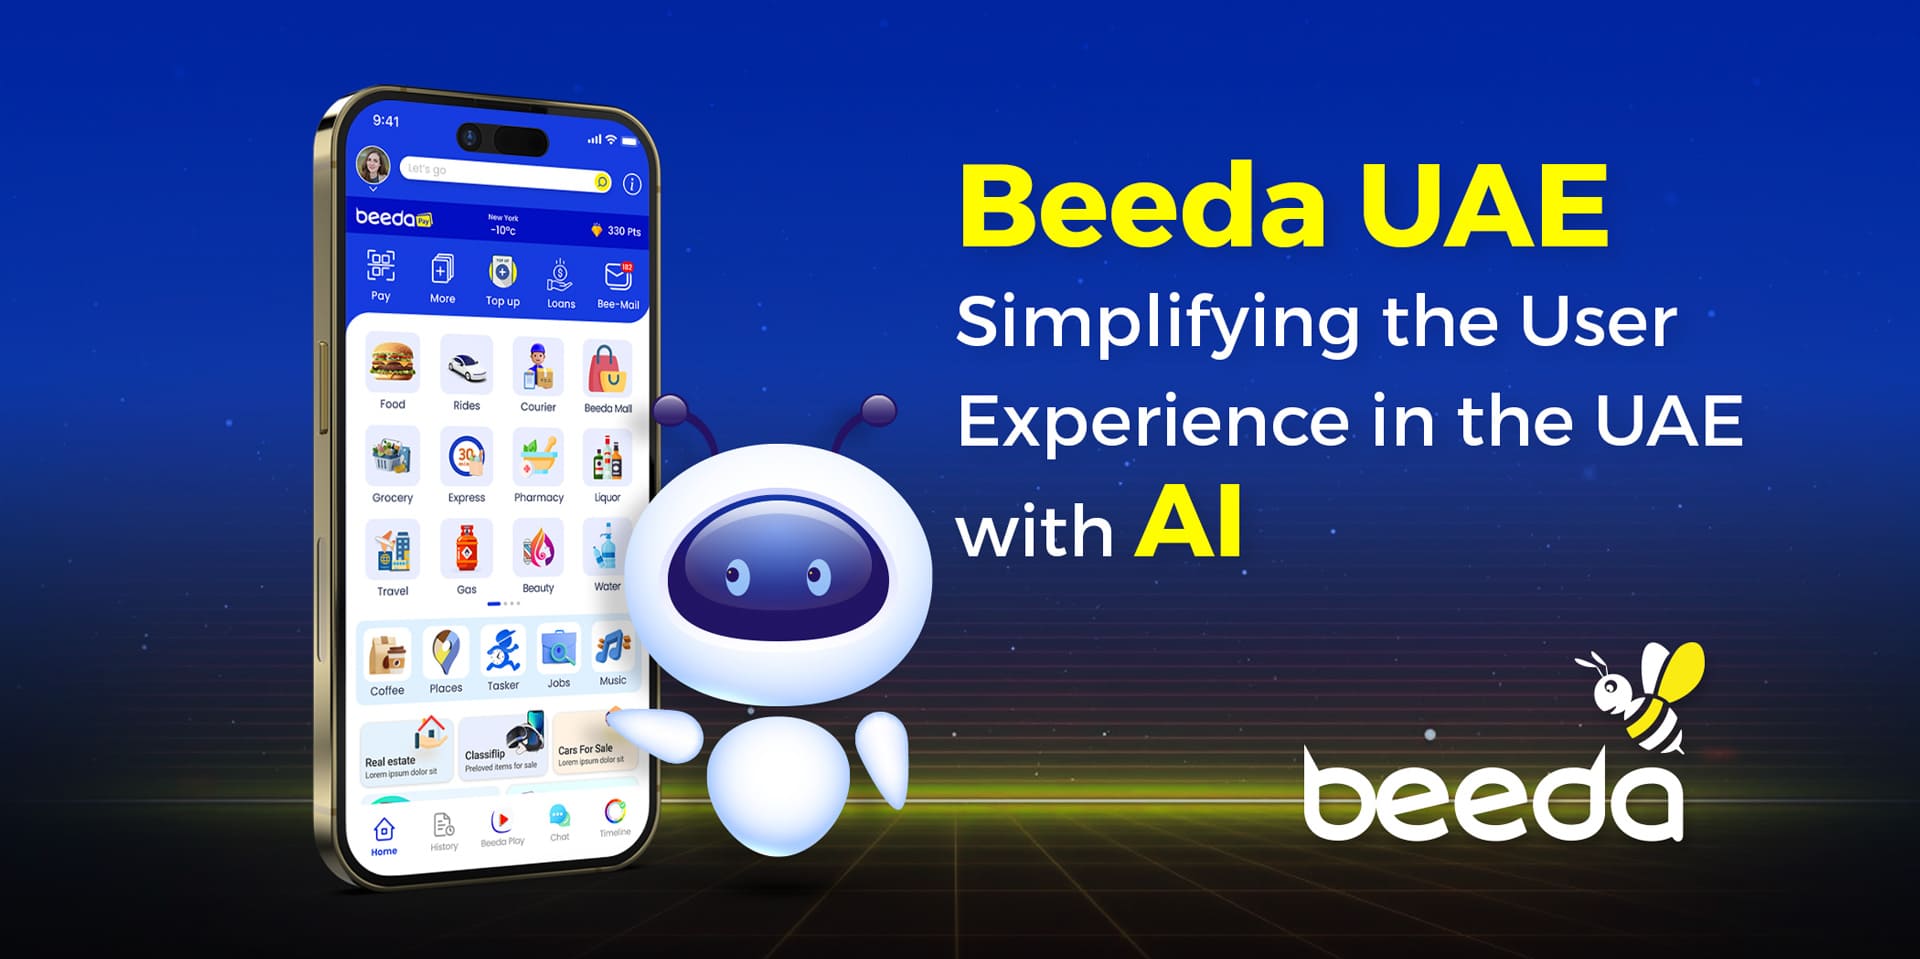 Beeda UAE: Simplifying the User Experience in the UAE with AI